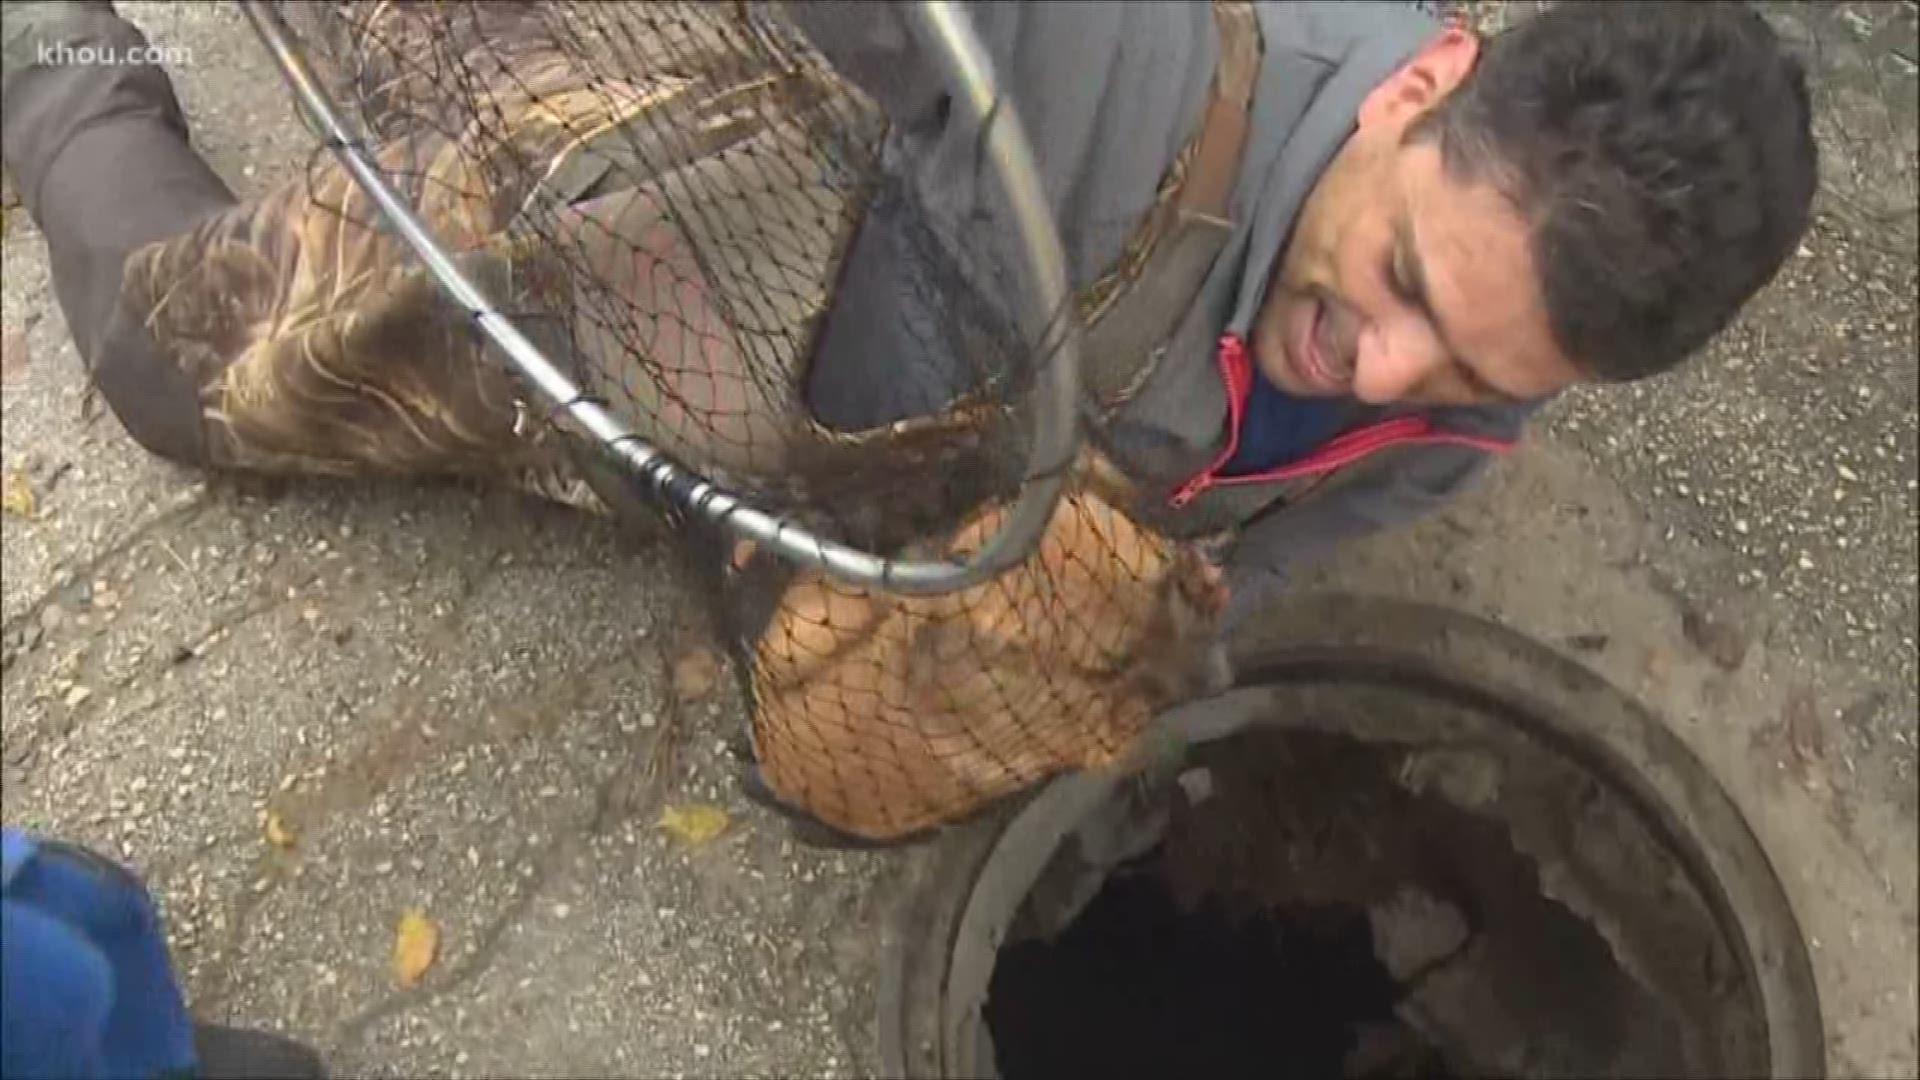 Frantic animal lovers rescued two frightened puppies Monday that had been trapped in a north Houston storm drain for days. Cameras were rolling and cheers erupted when the little dogs were lifted out of the drain, several minutes apart. An Oakland A's pit